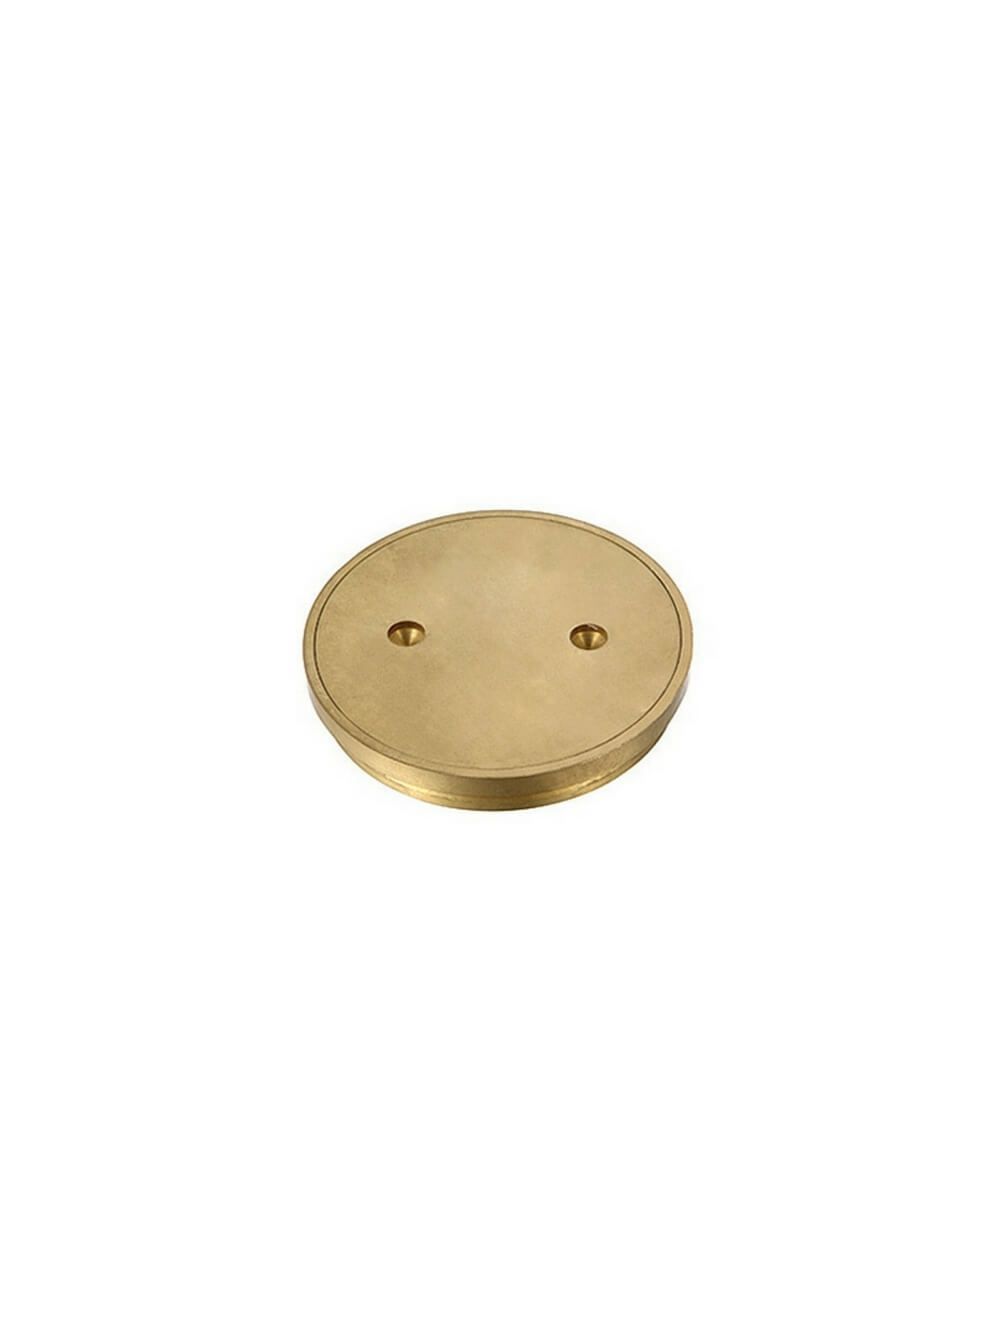 100mm Floor Clear Out Brass Round Suit PVC FLG13